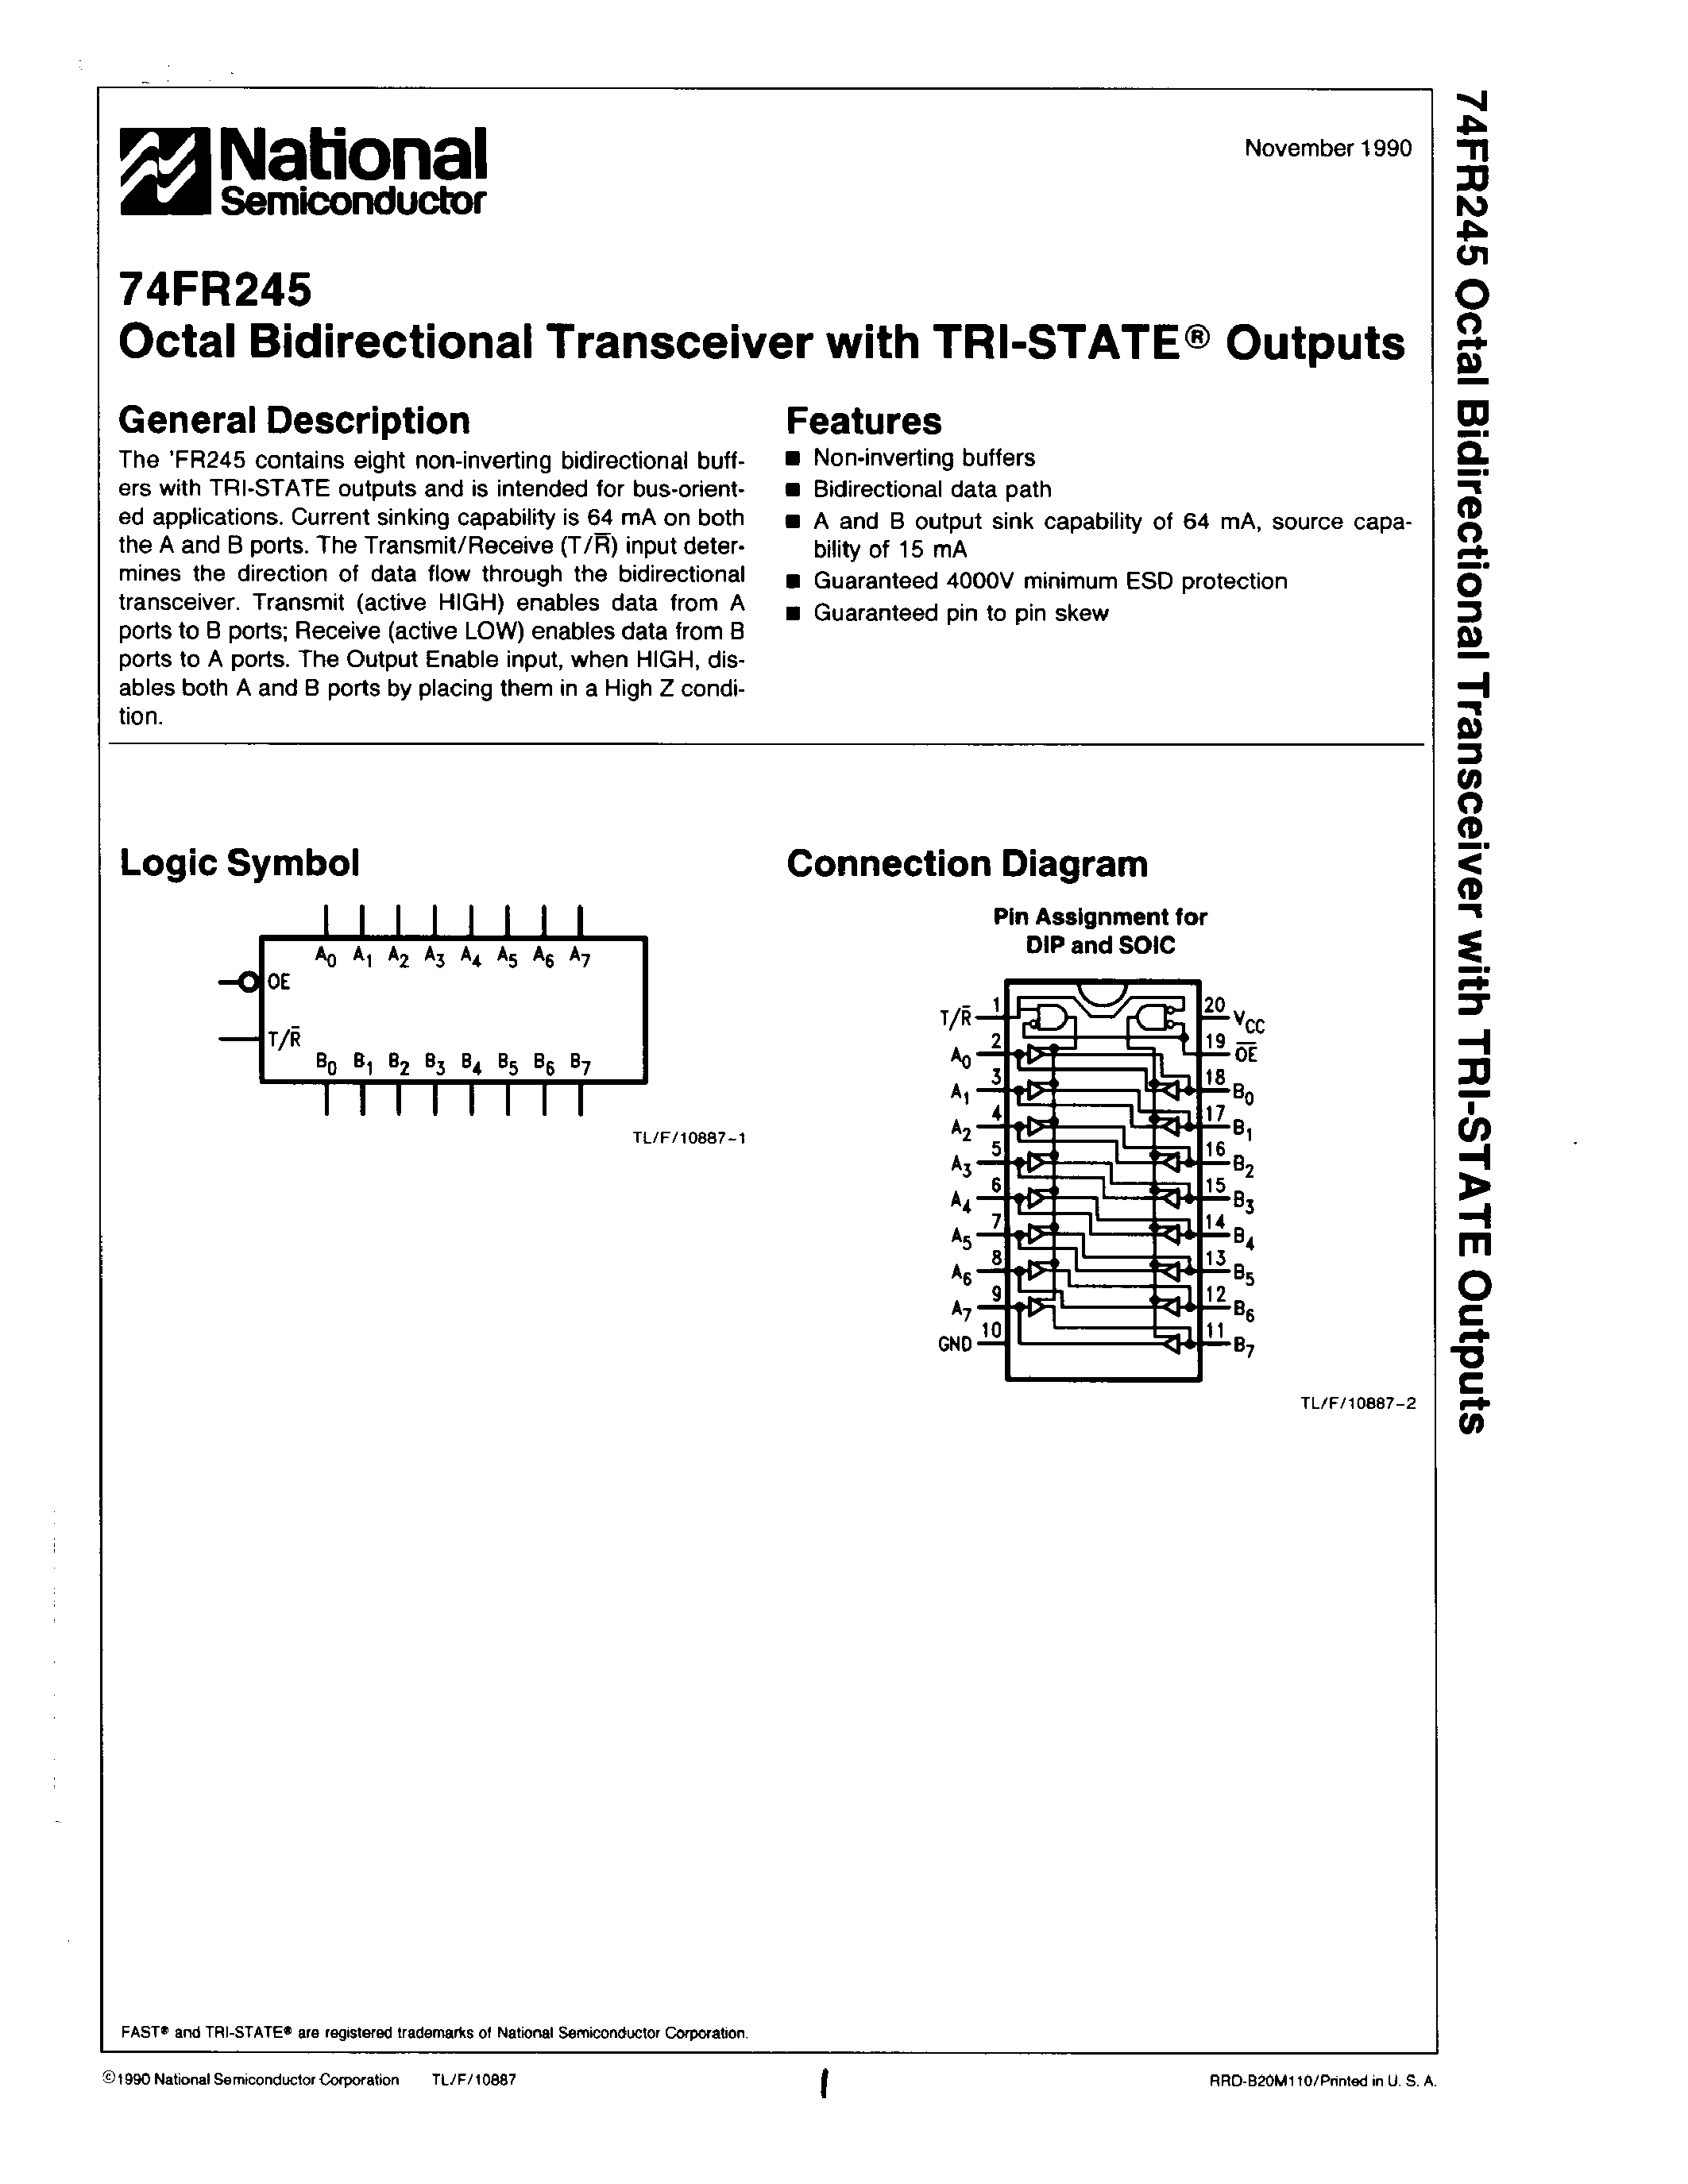 Даташит 74FR245S - Octal Bidirectional Transceiver with TRI-STATE Outputs страница 1